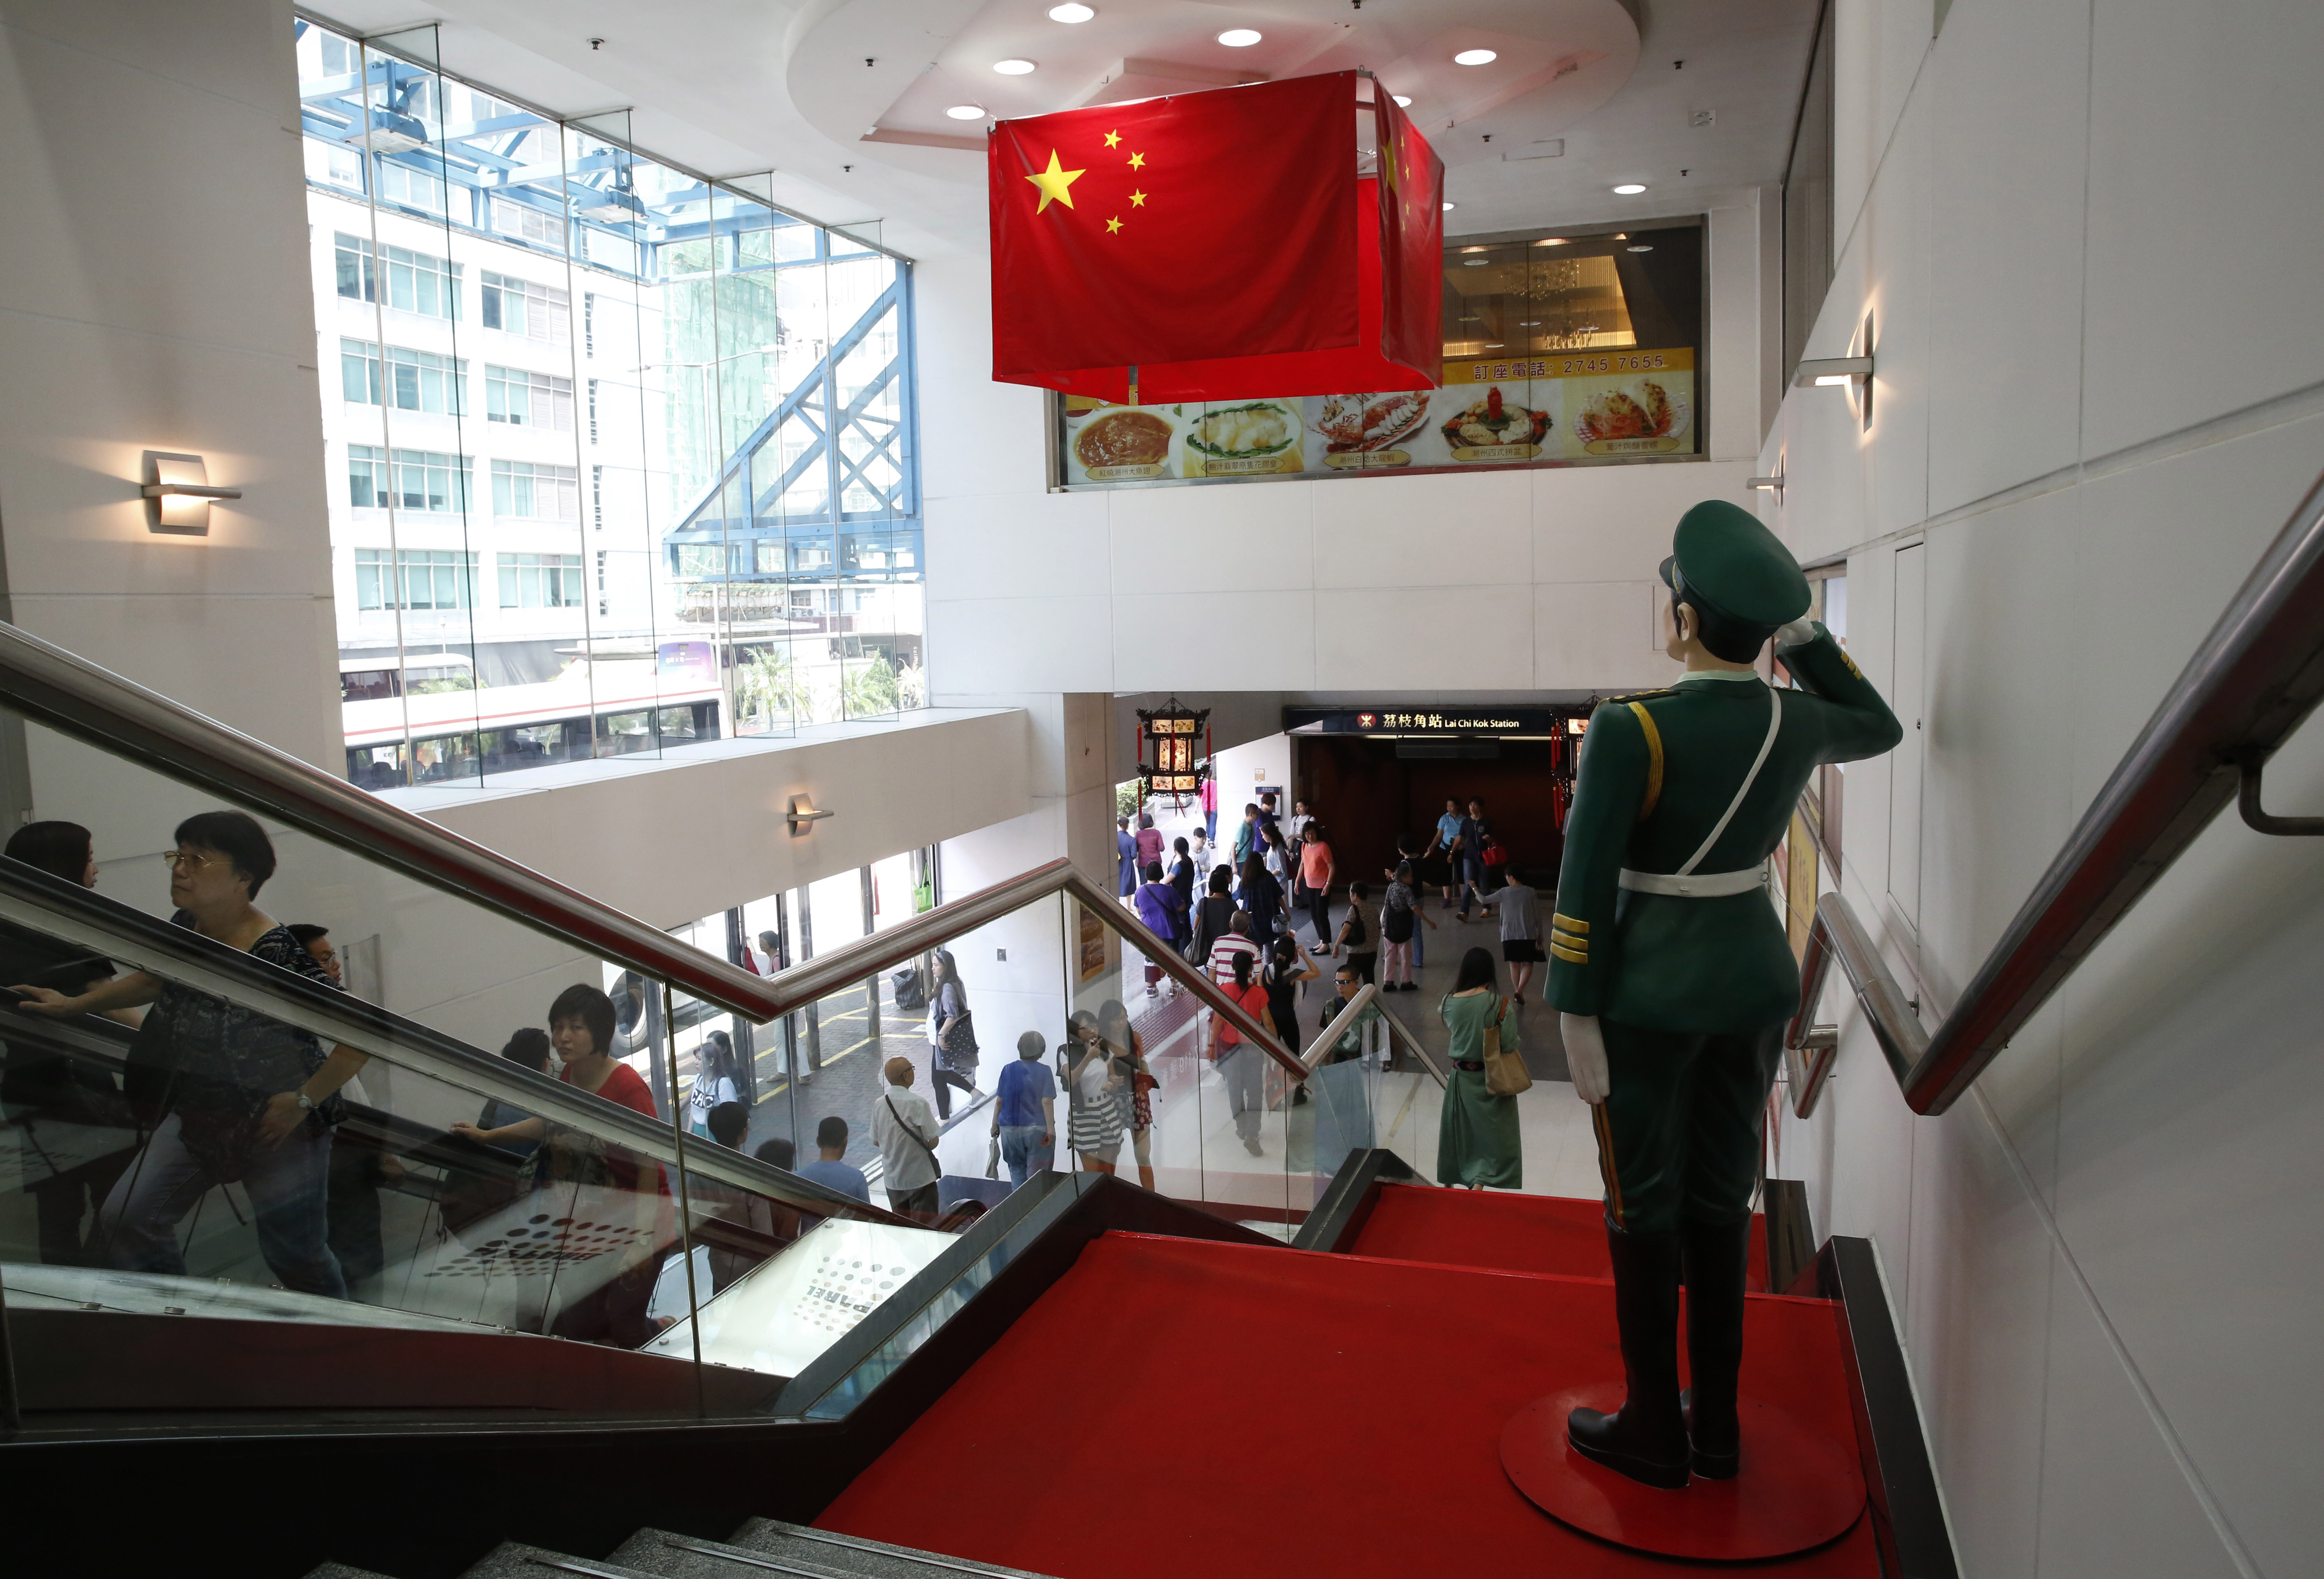 A statue of Chinese People's Liberation Army (PLA) personnel is displayed to cerebrate the upcoming 66th anniversary of China National Day on Oct. 1 at a shopping mall in Hong Kong, Wednesday, Sept. 23, 2015. Hong Kong shopping malls are making the effort to to attract more mainland shoppers during the Chinese National Day holidays. (AP Photo/Kin Cheung)